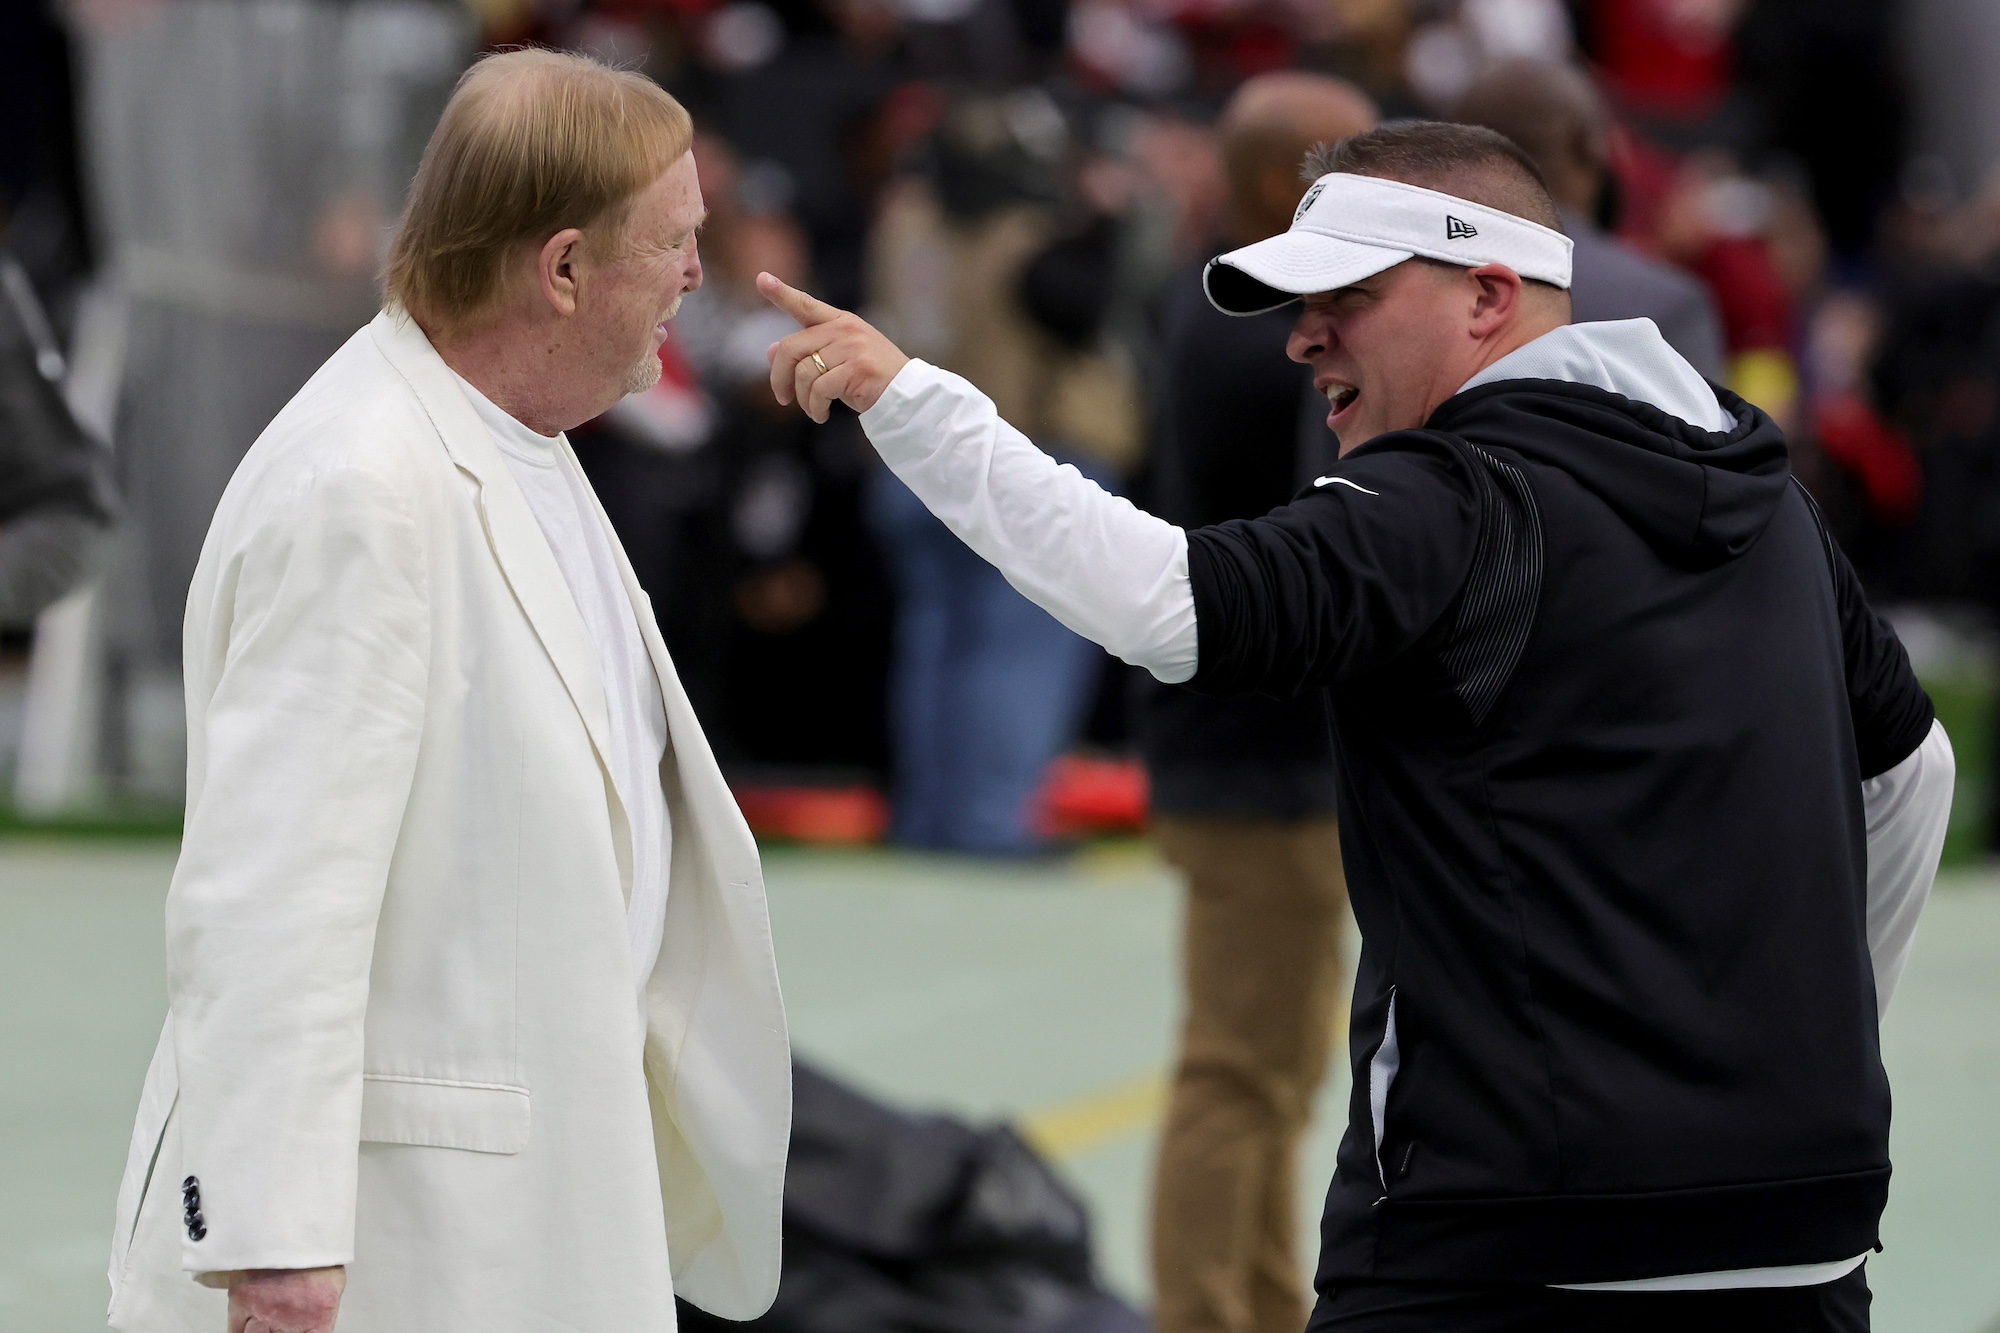 LAS VEGAS, NEVADA - JANUARY 01: Owner and managing general partner Mark Davis (L) of the Las Vegas Raiders talks with head coach Josh McDaniels on the Raiders' sideline before the team's game against the San Francisco 49ers at Allegiant Stadium on January 01, 2023 in Las Vegas, Nevada. (Photo by Ethan Miller/Getty Images)